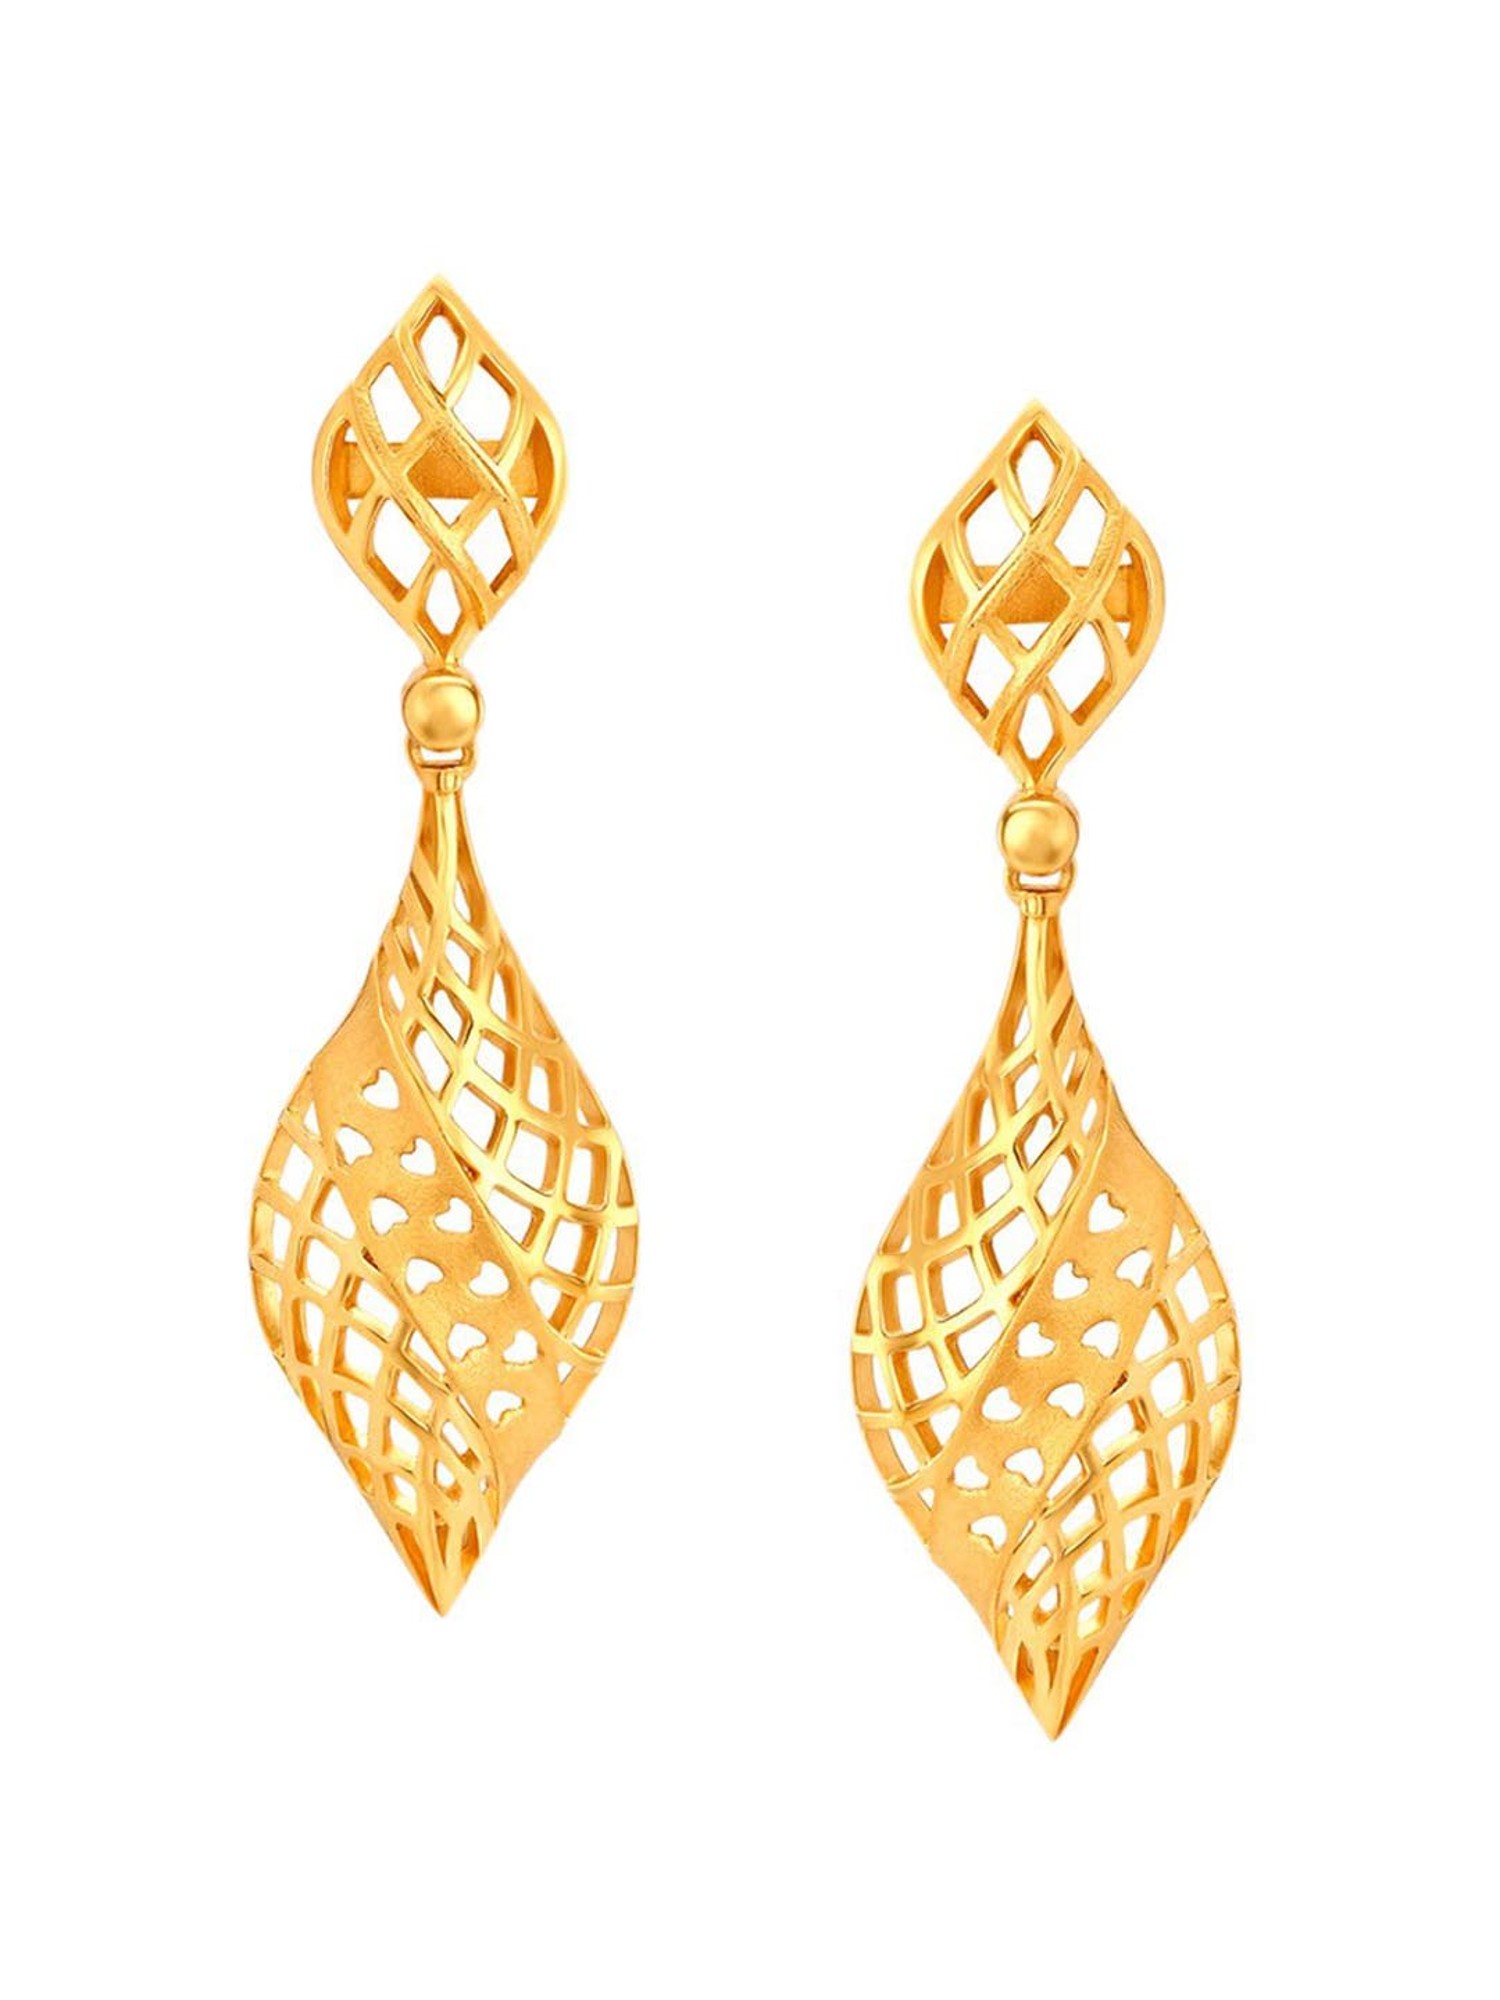 tanishq gold jewellery designs with price daily wear gold earrings gold  earrings designs - YouTube